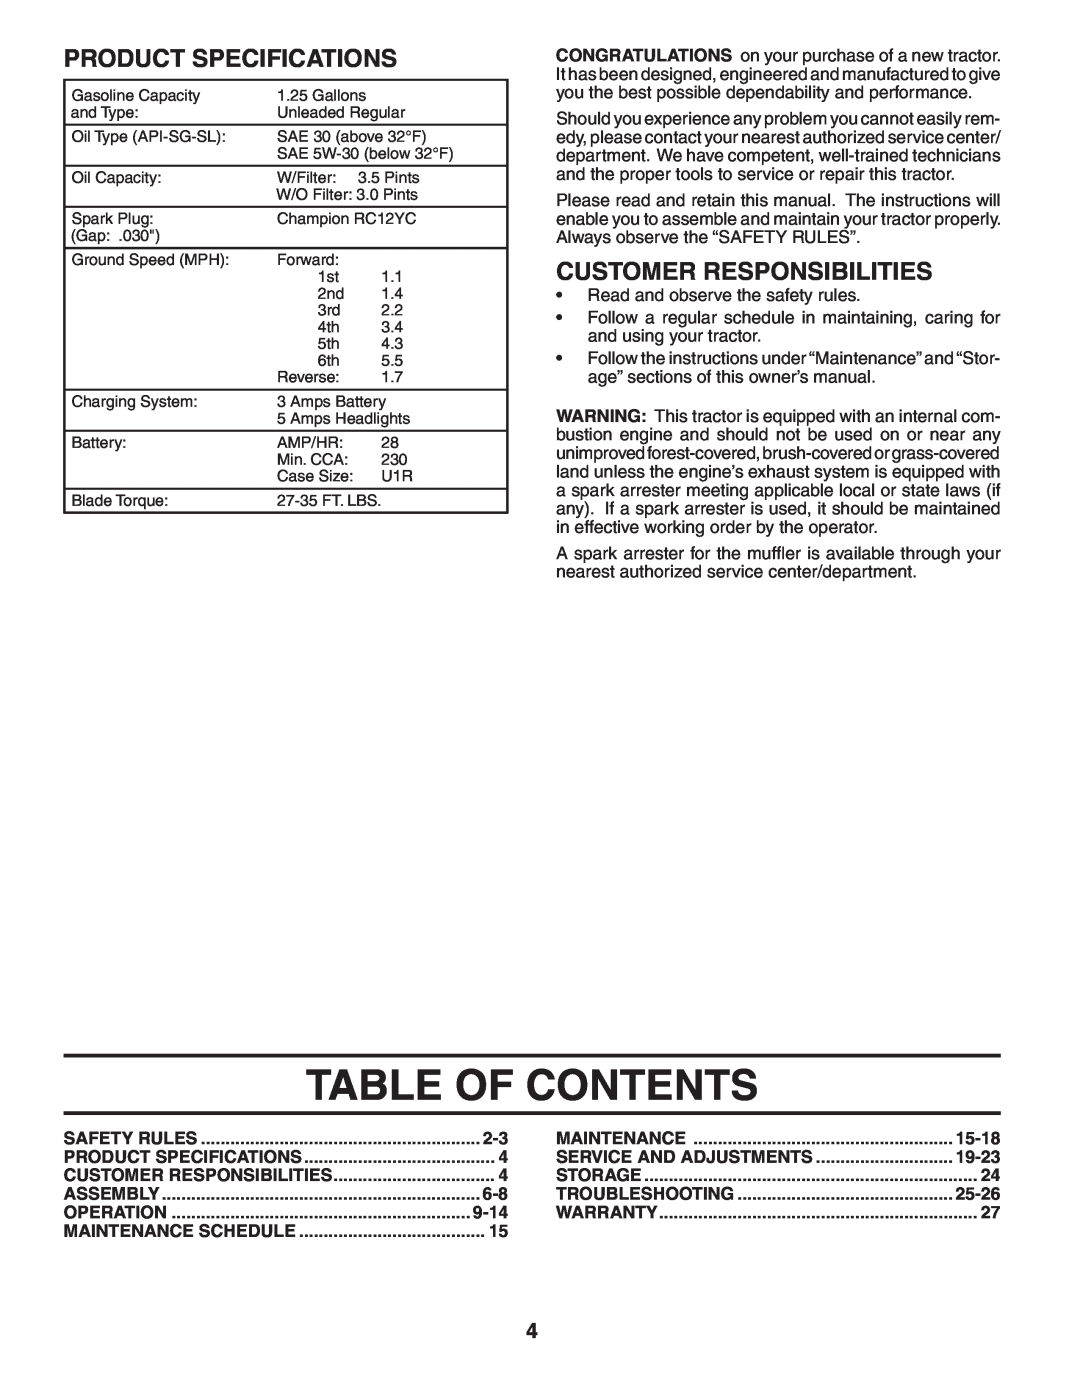 Poulan HD17542 manual Table Of Contents, Product Specifications, Customer Responsibilities 